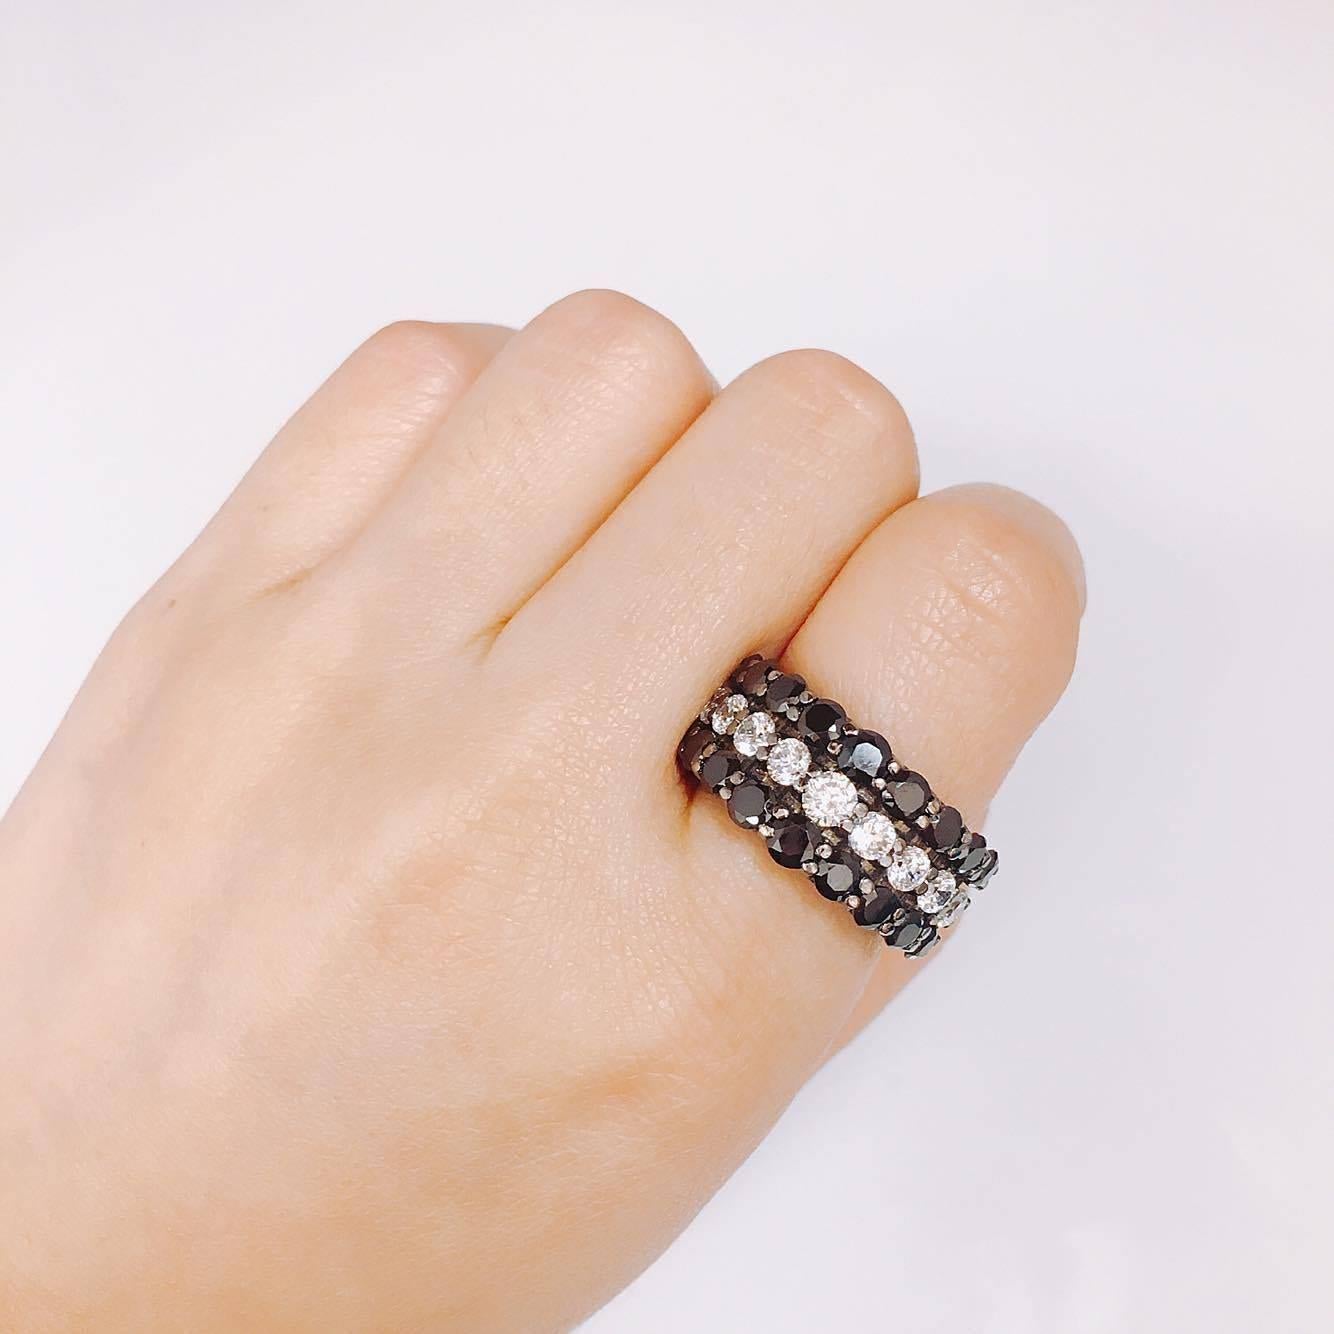 Very unique striking ring created in our own handmade factory! This ring can be ordered in 18k white gold if the black rhodium is not your taste. All sizes available. 